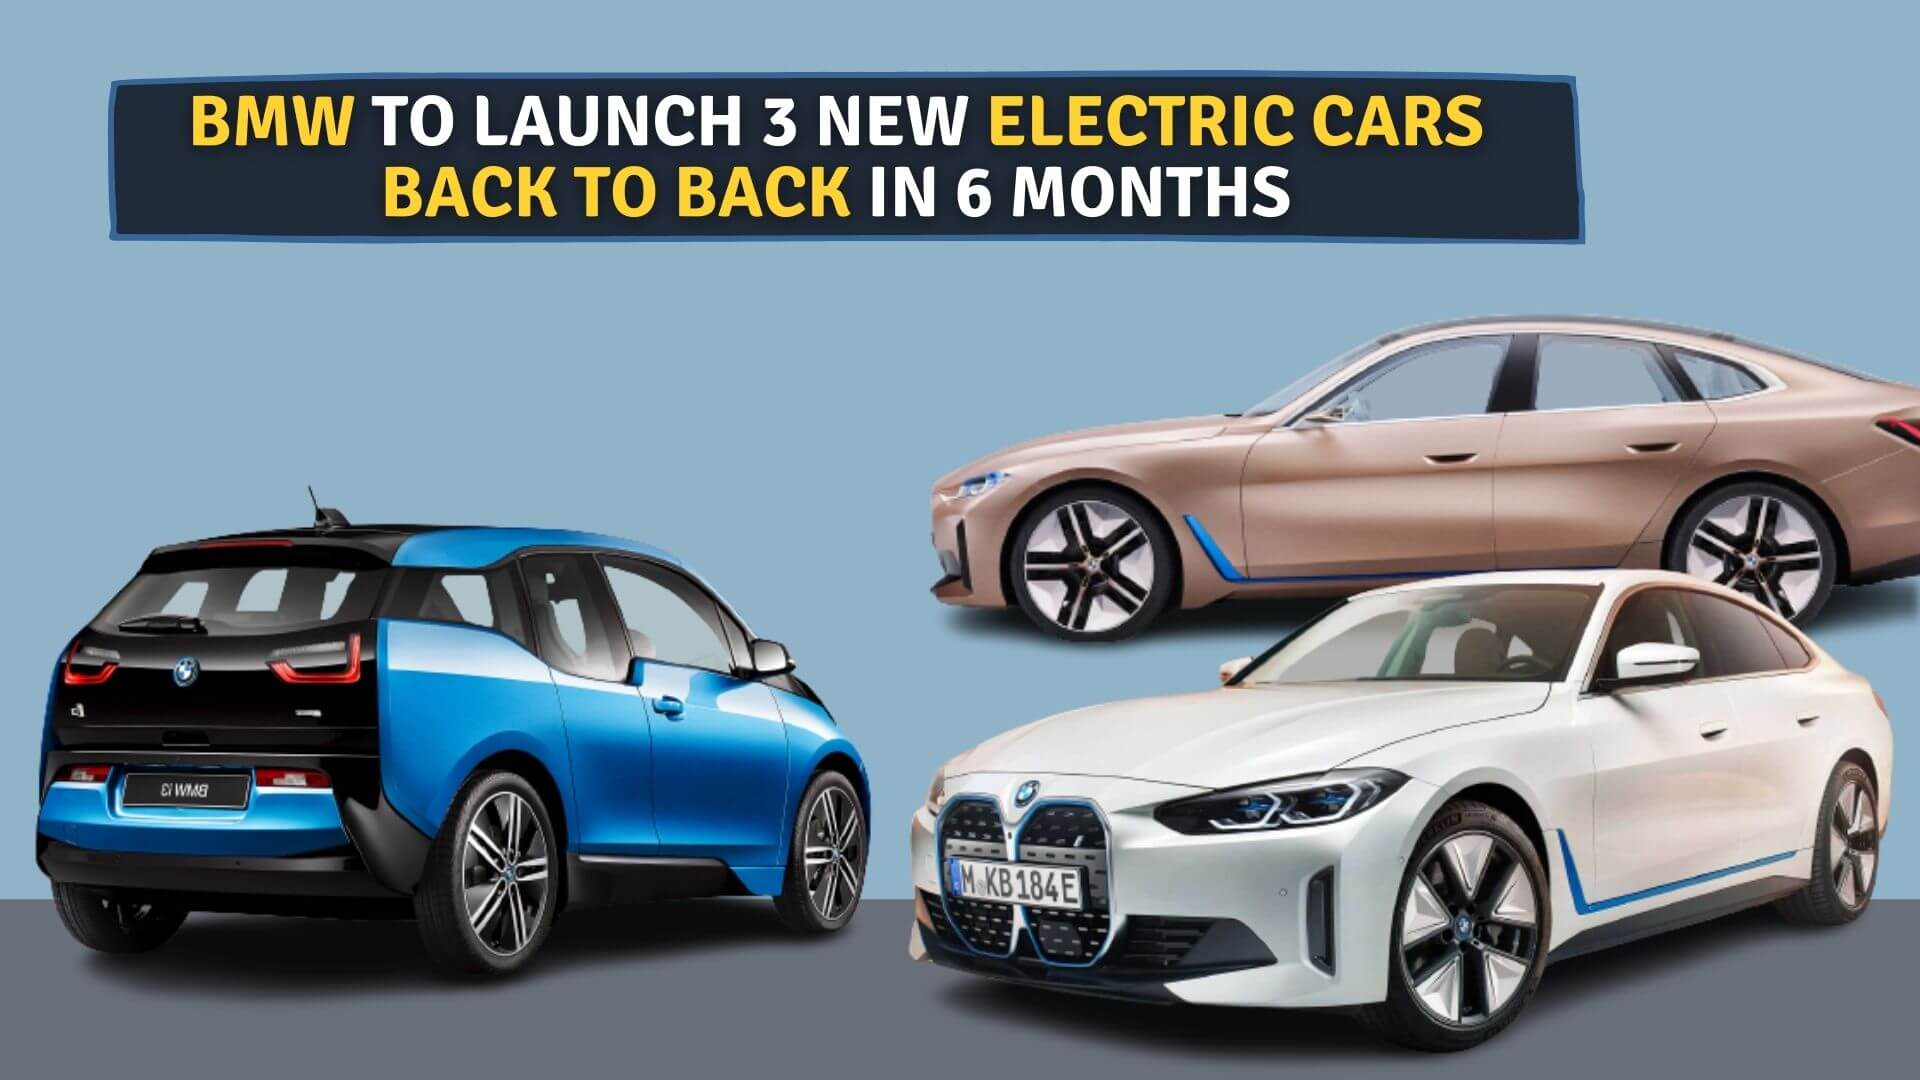 https://e-vehicleinfo.com/bmw-to-launch-3-new-electric-cars/